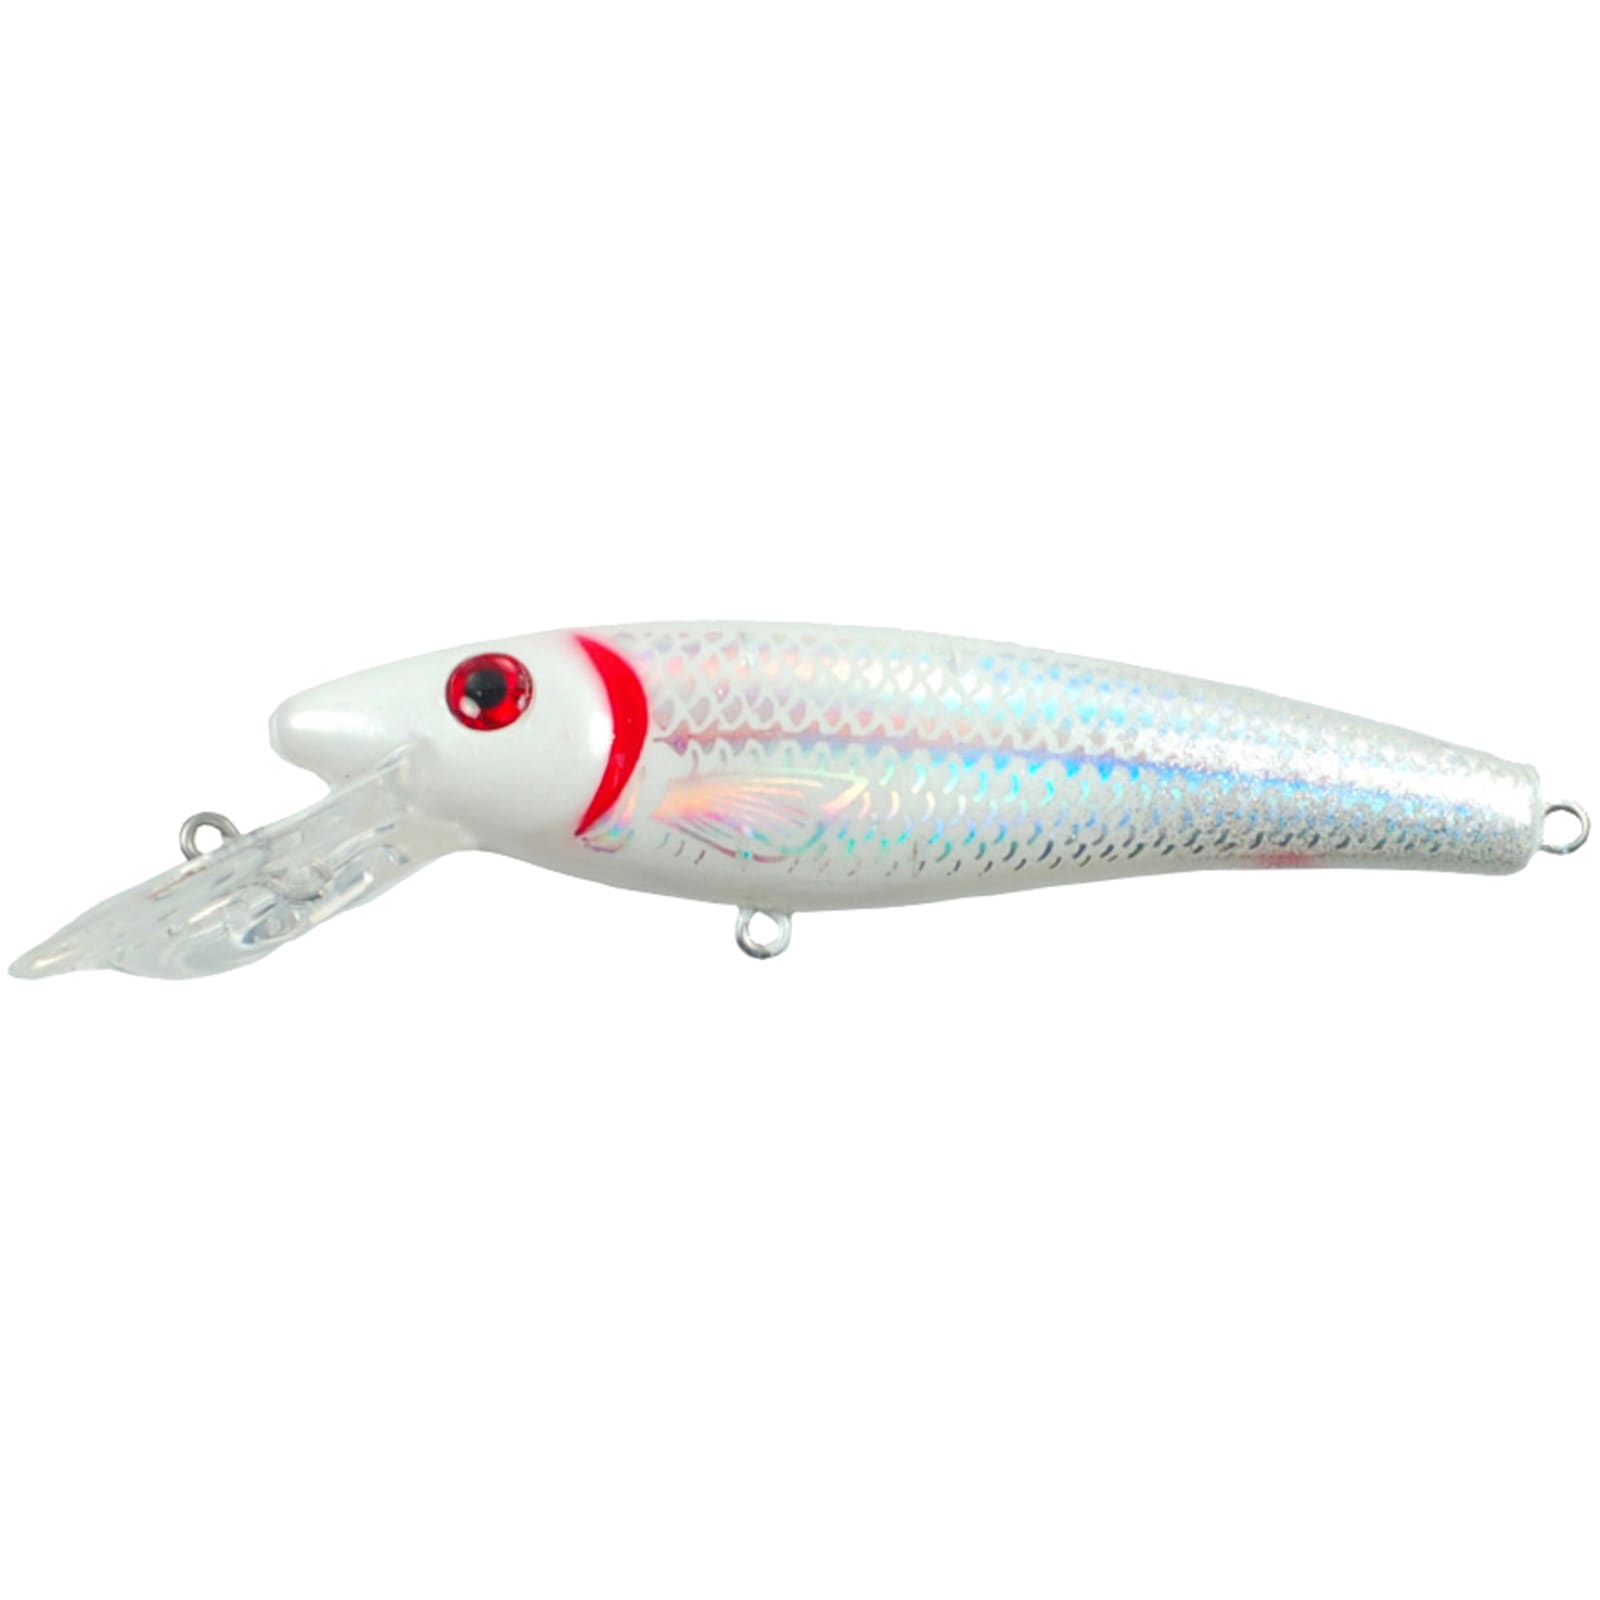 Lil' Ernie 6 in Superman Straight Crankbait by Musky Mania at